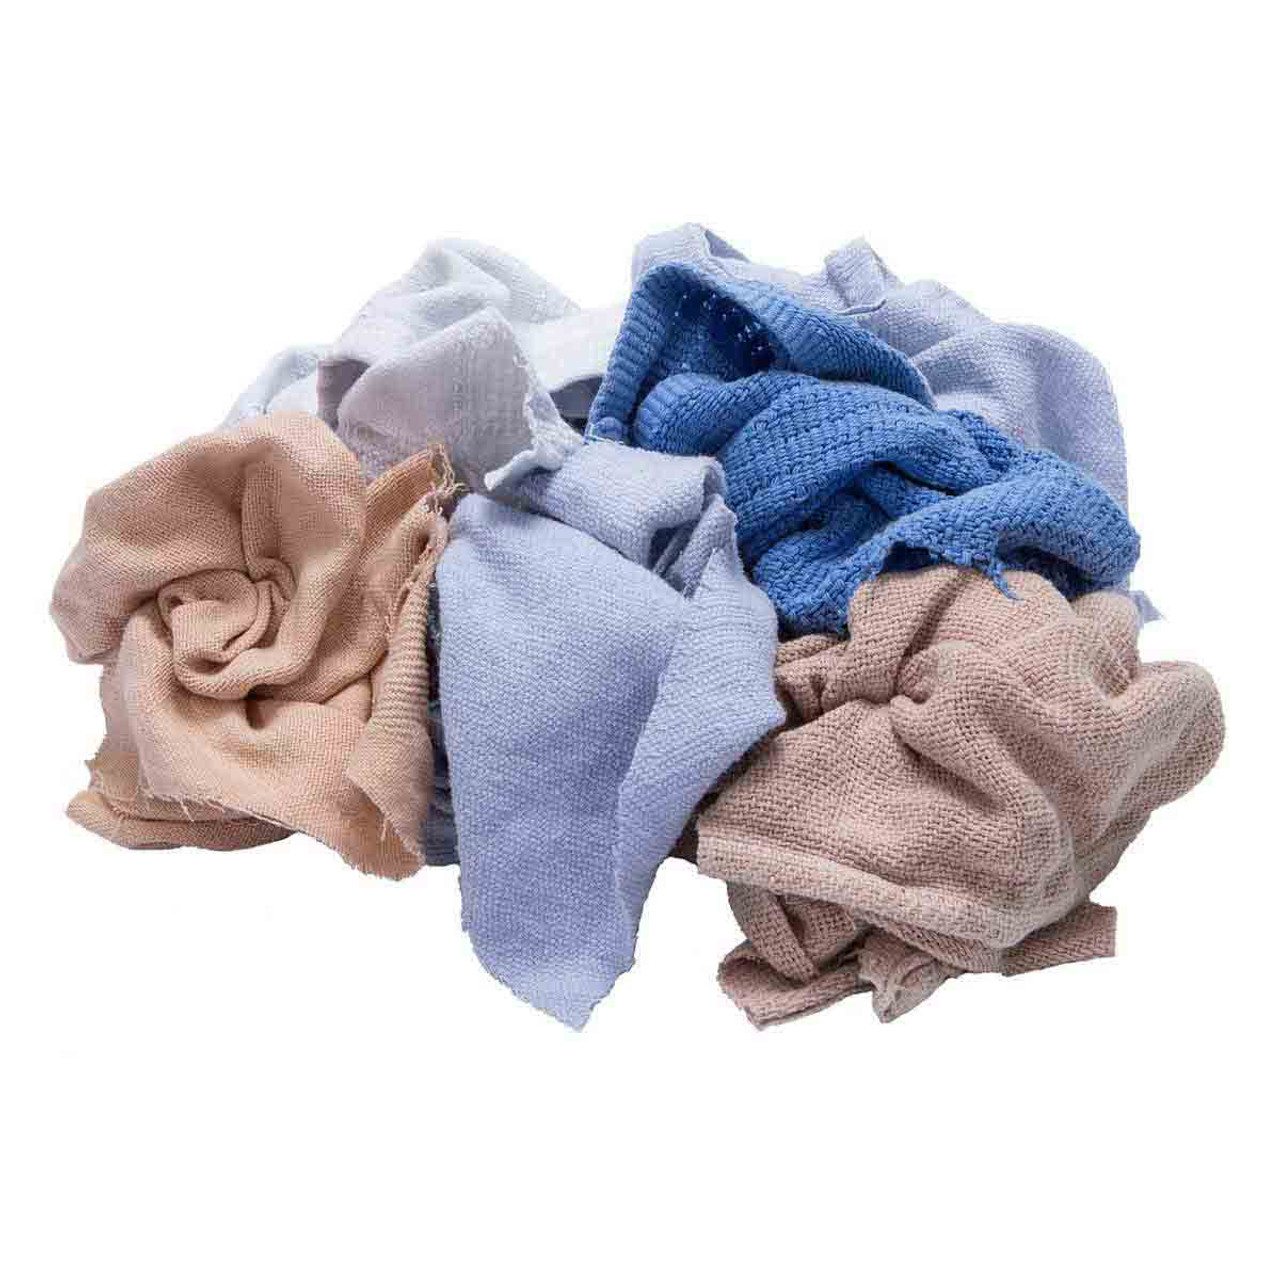 https://cdn11.bigcommerce.com/s-a5uwe4c7wz/images/stencil/1280x1280/products/606/1538/Thermal-Rags-Bulk-Recycled-Mixed-Colors__55213.1585745683.jpg?c=1